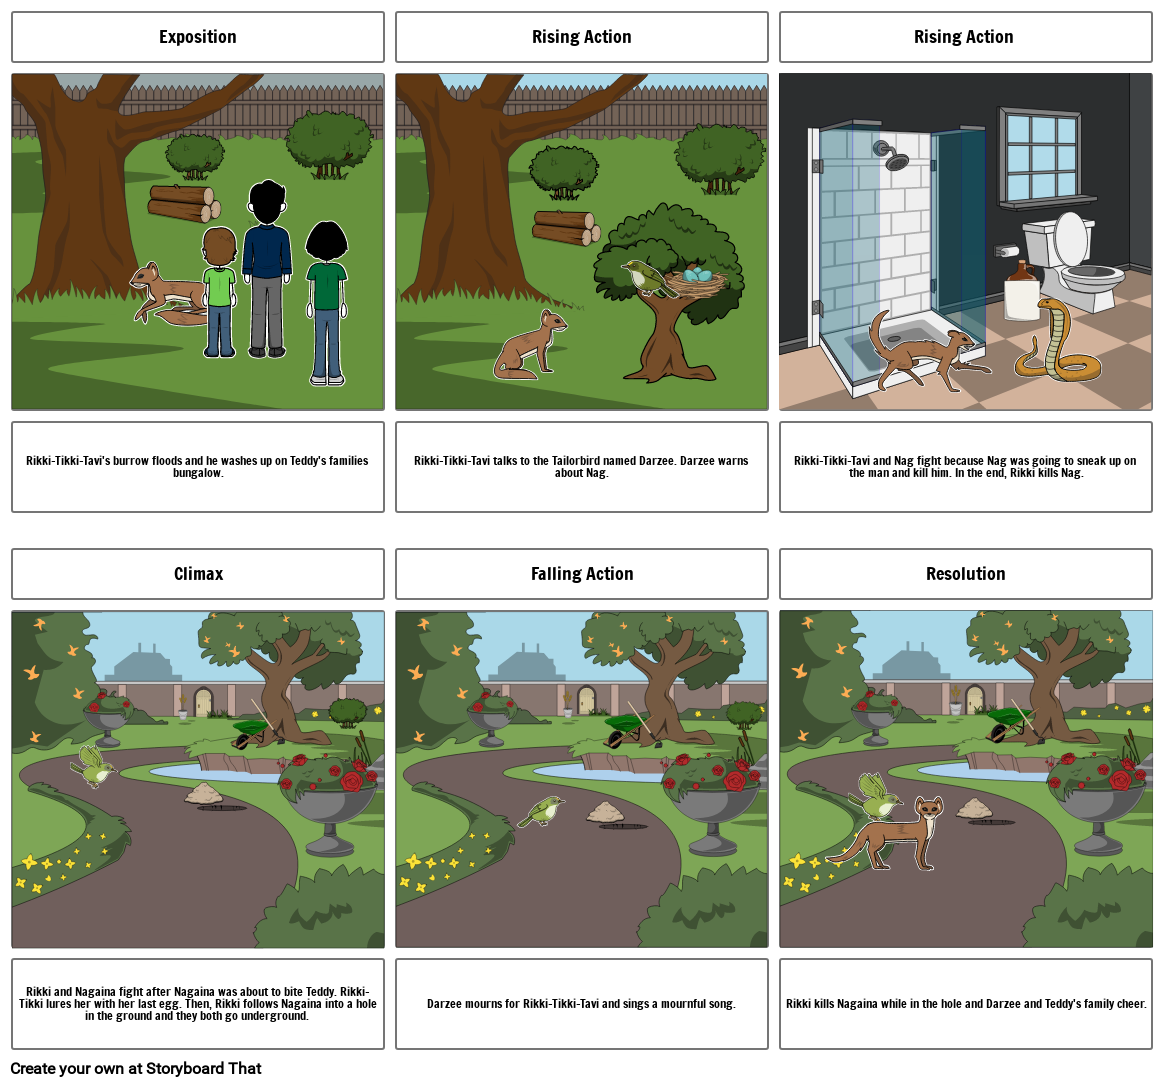 teach-the-short-story-rikki-tikki-tavi-with-this-set-of-middle-school-reading-ac-middle